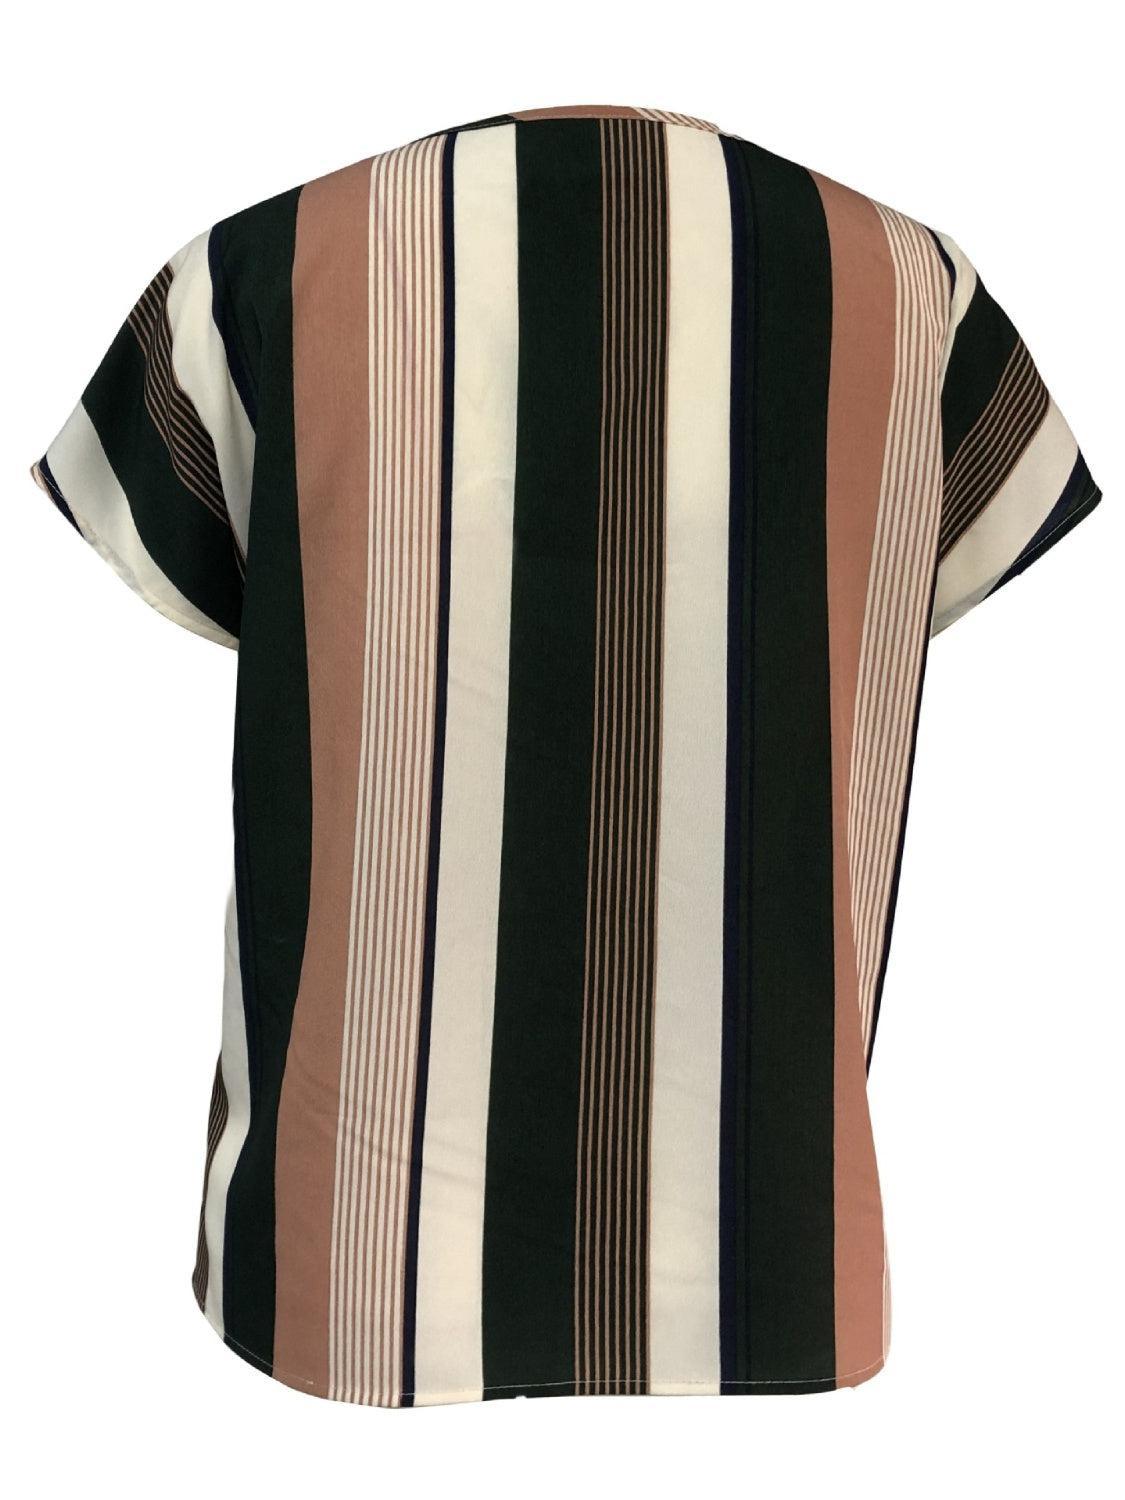 a women's shirt with a striped pattern